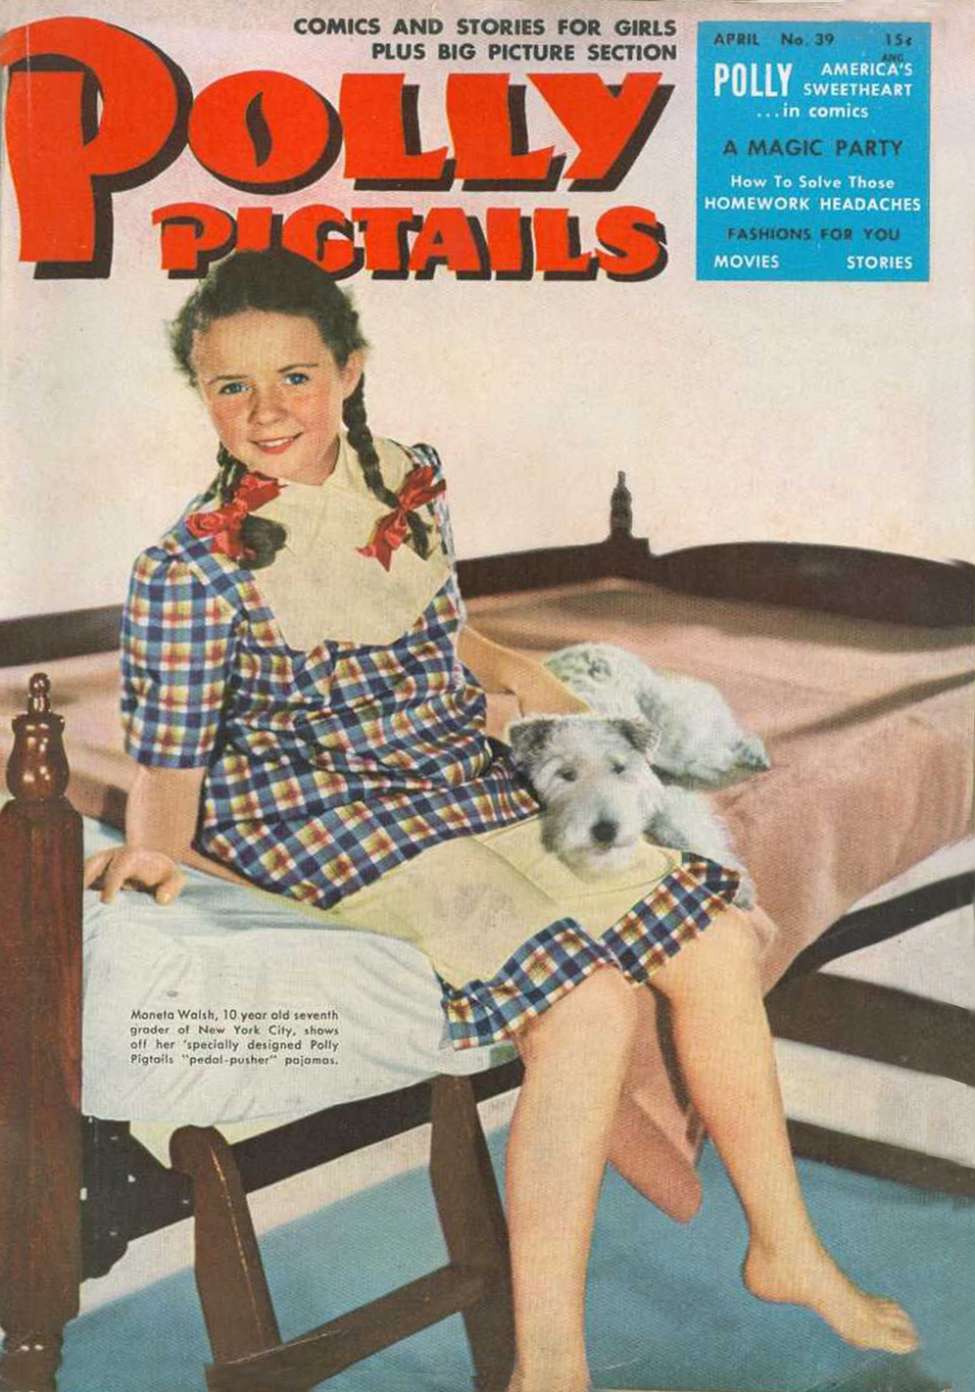 Book Cover For Polly Pigtails 39